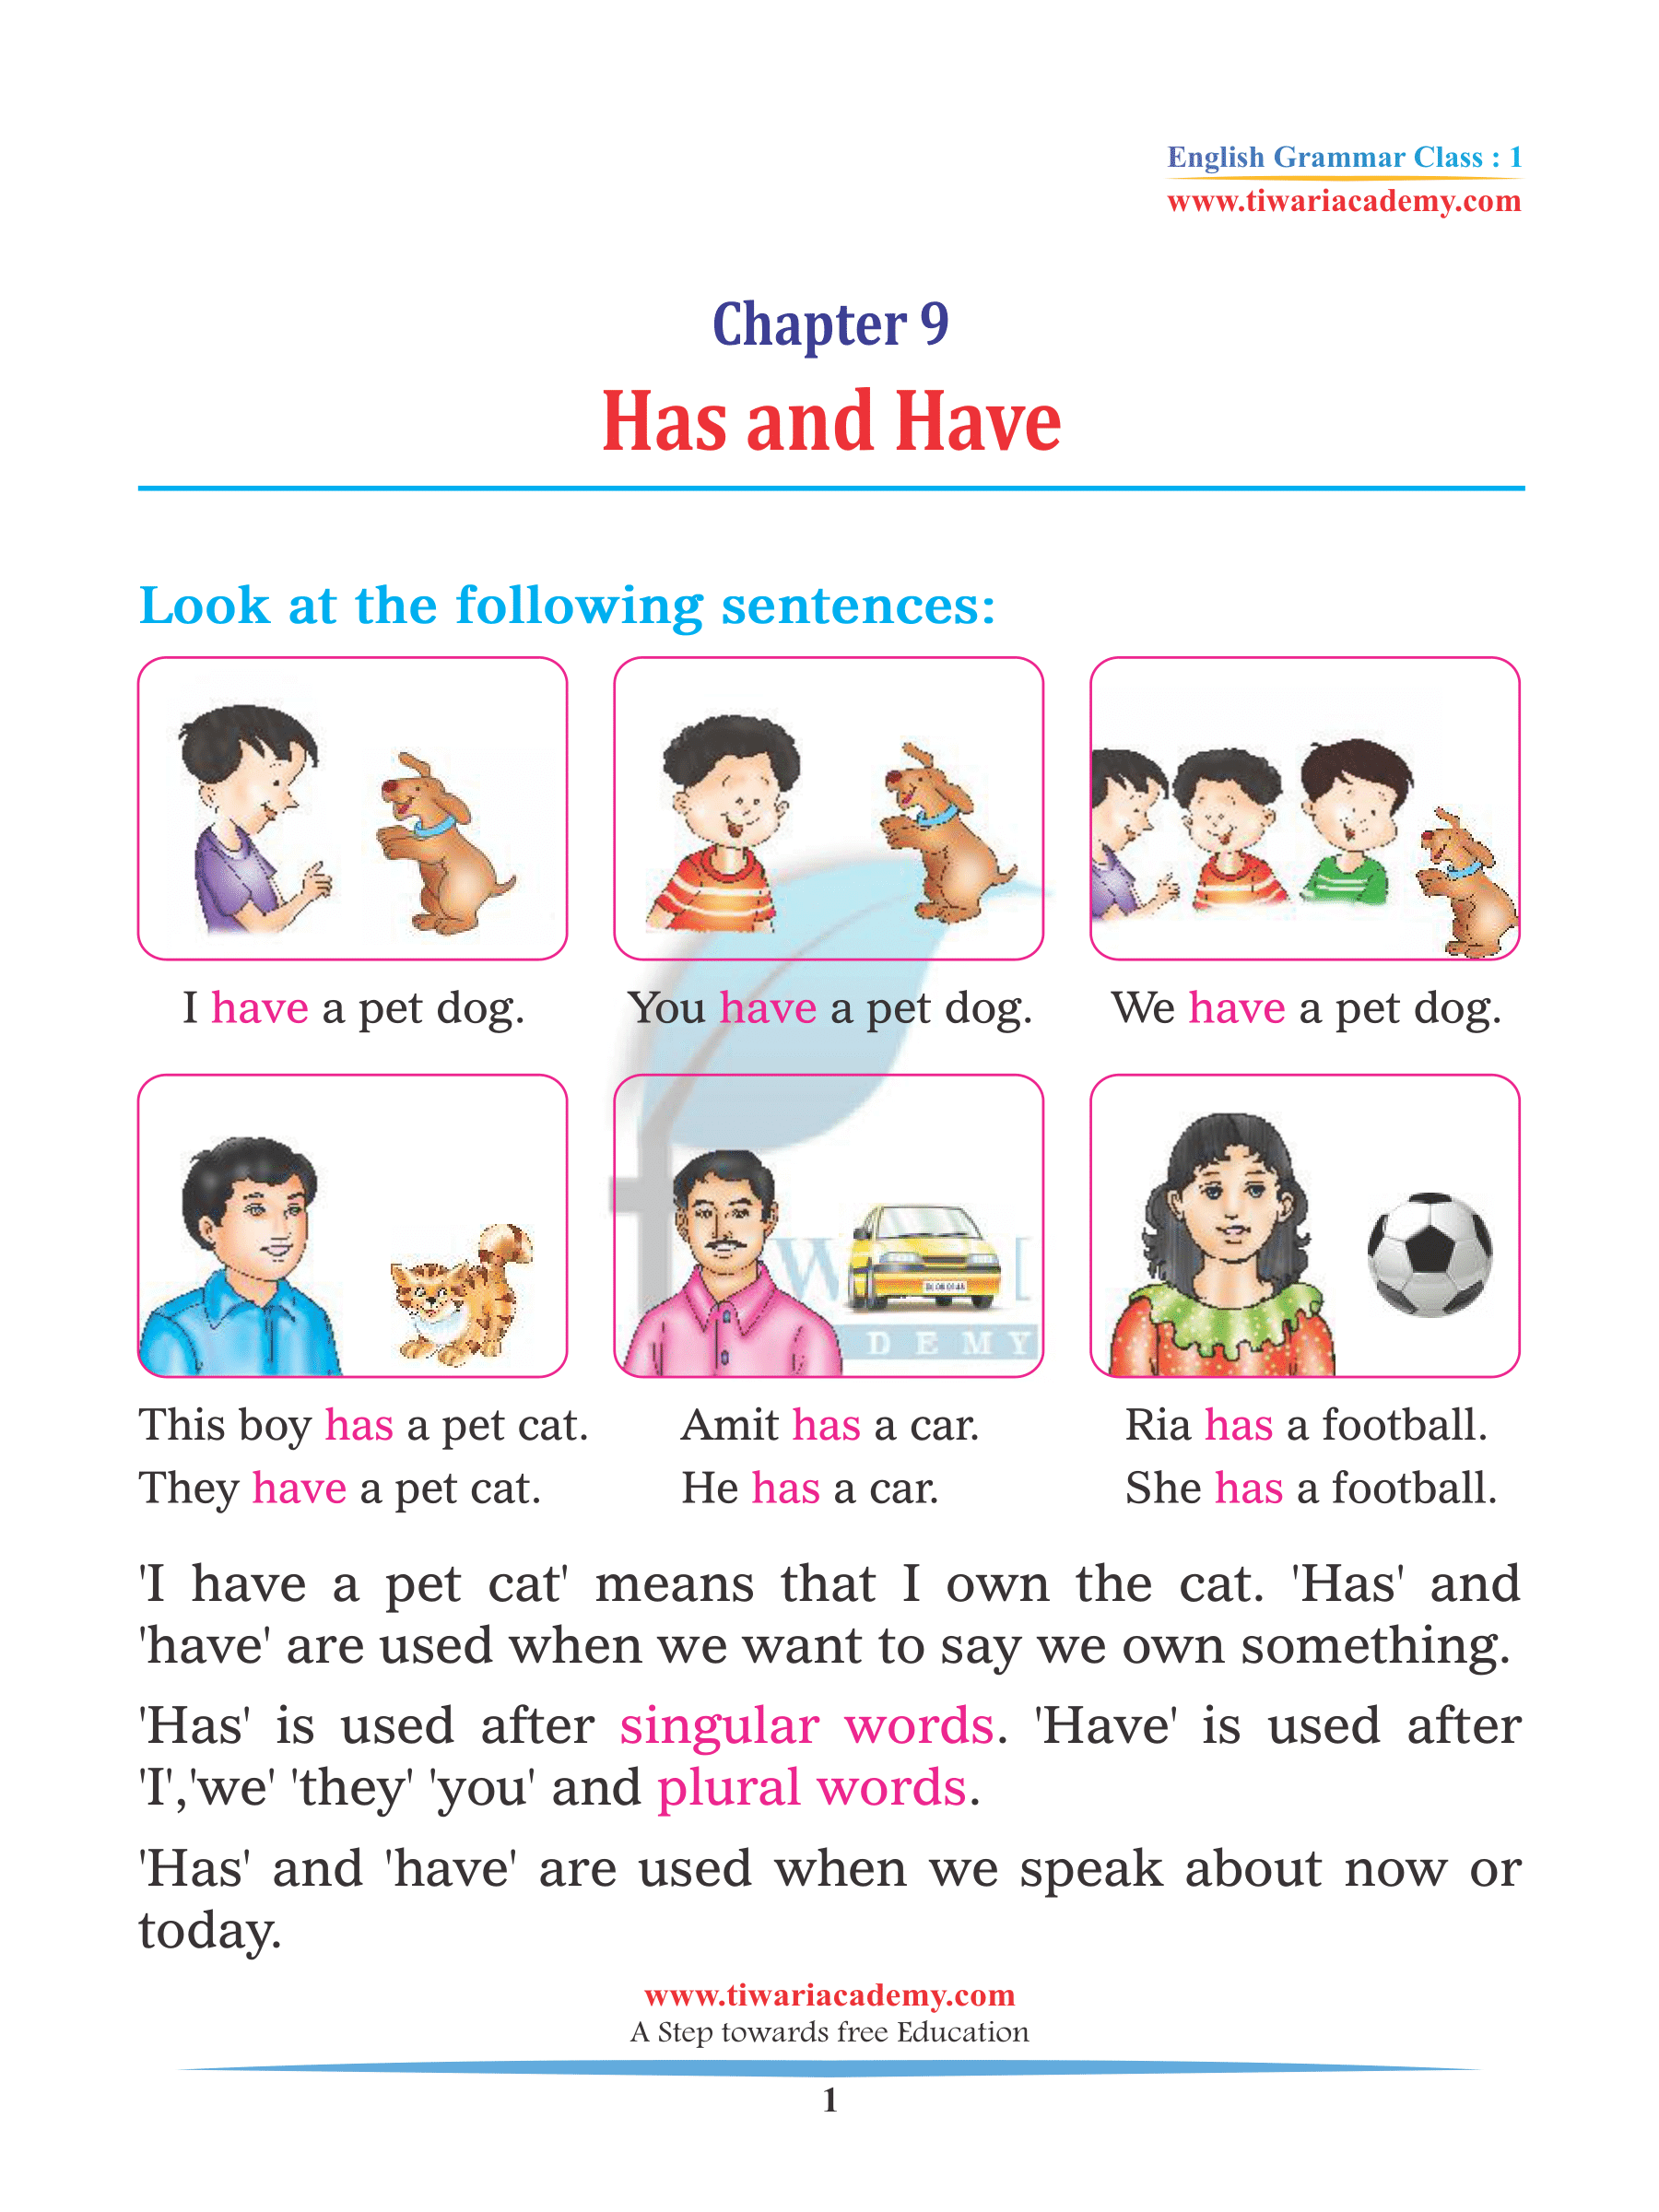 Class 1 English Grammar use of Has and Have